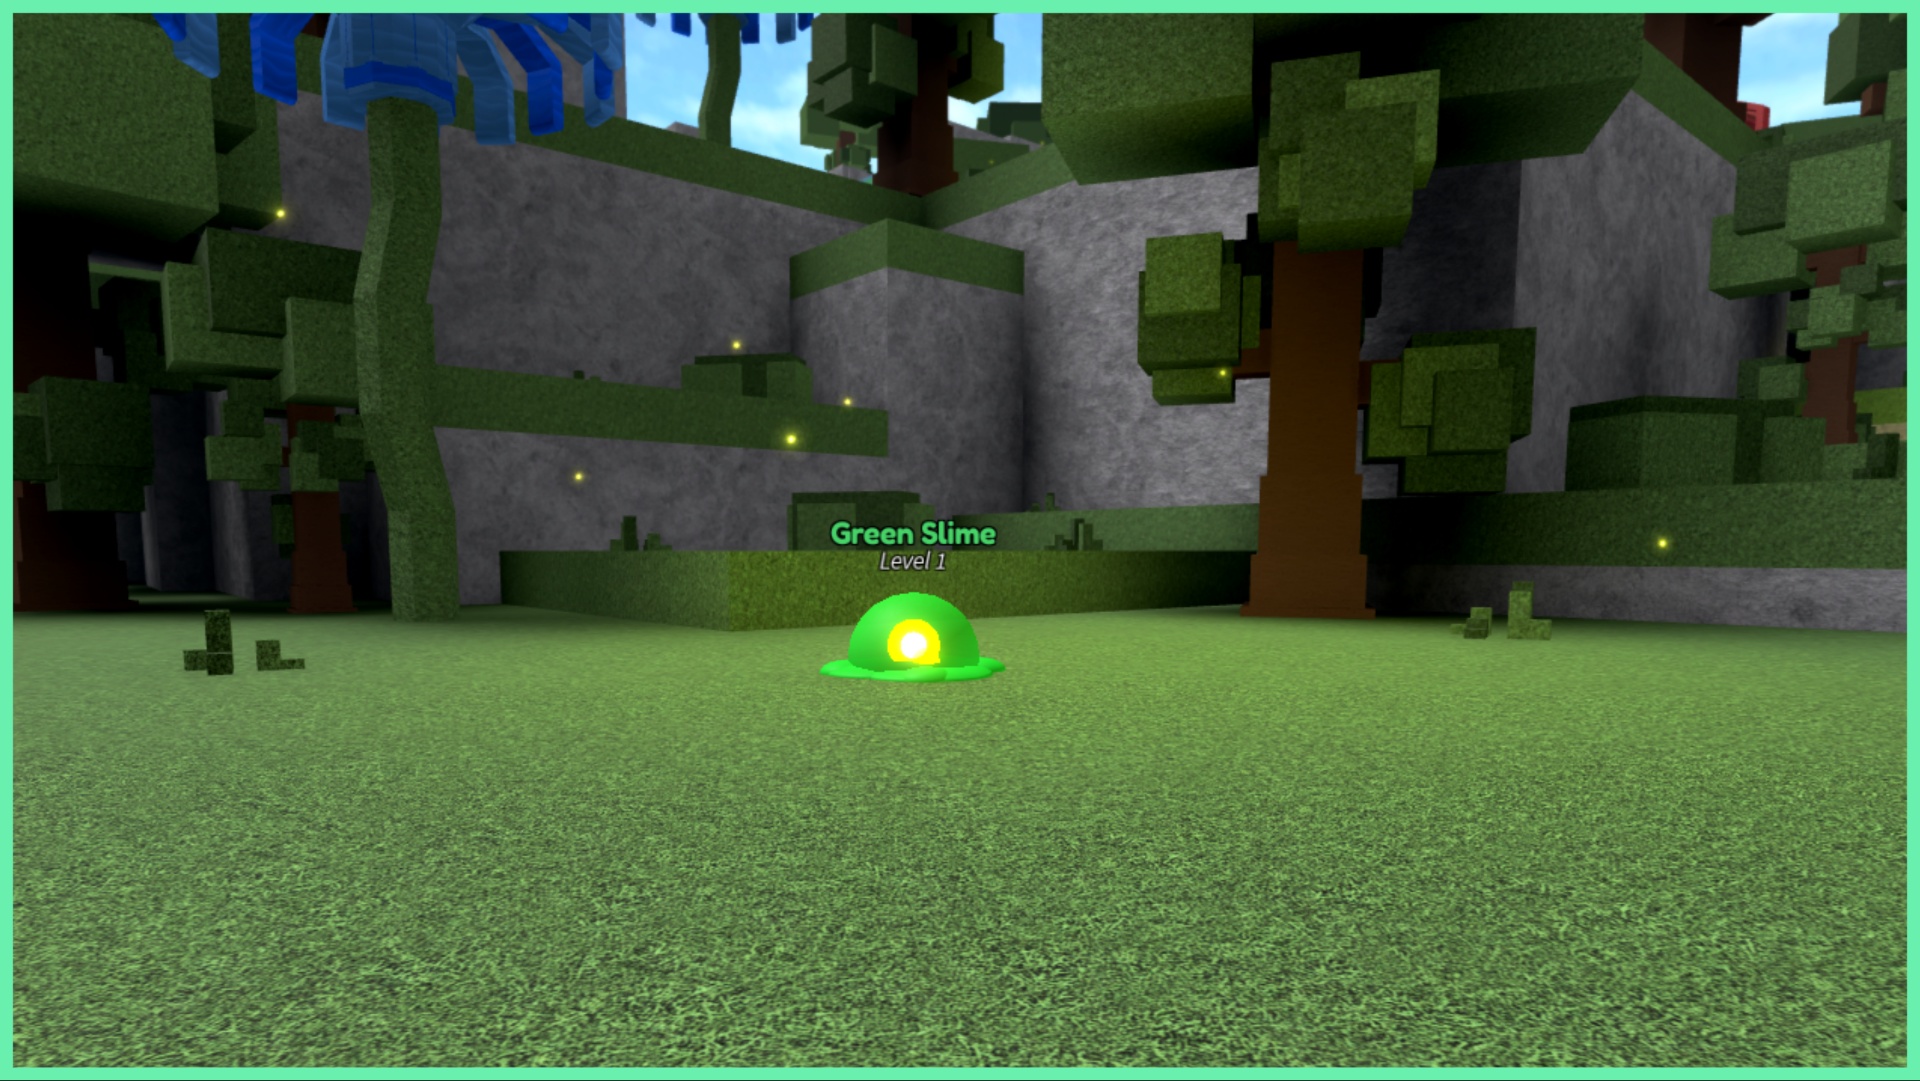 the image shows the greenery of area 1 with trees and hills in the background. Central to the game screenshot is a green slime which has a lime green glowing core around its gelatinous outer shell